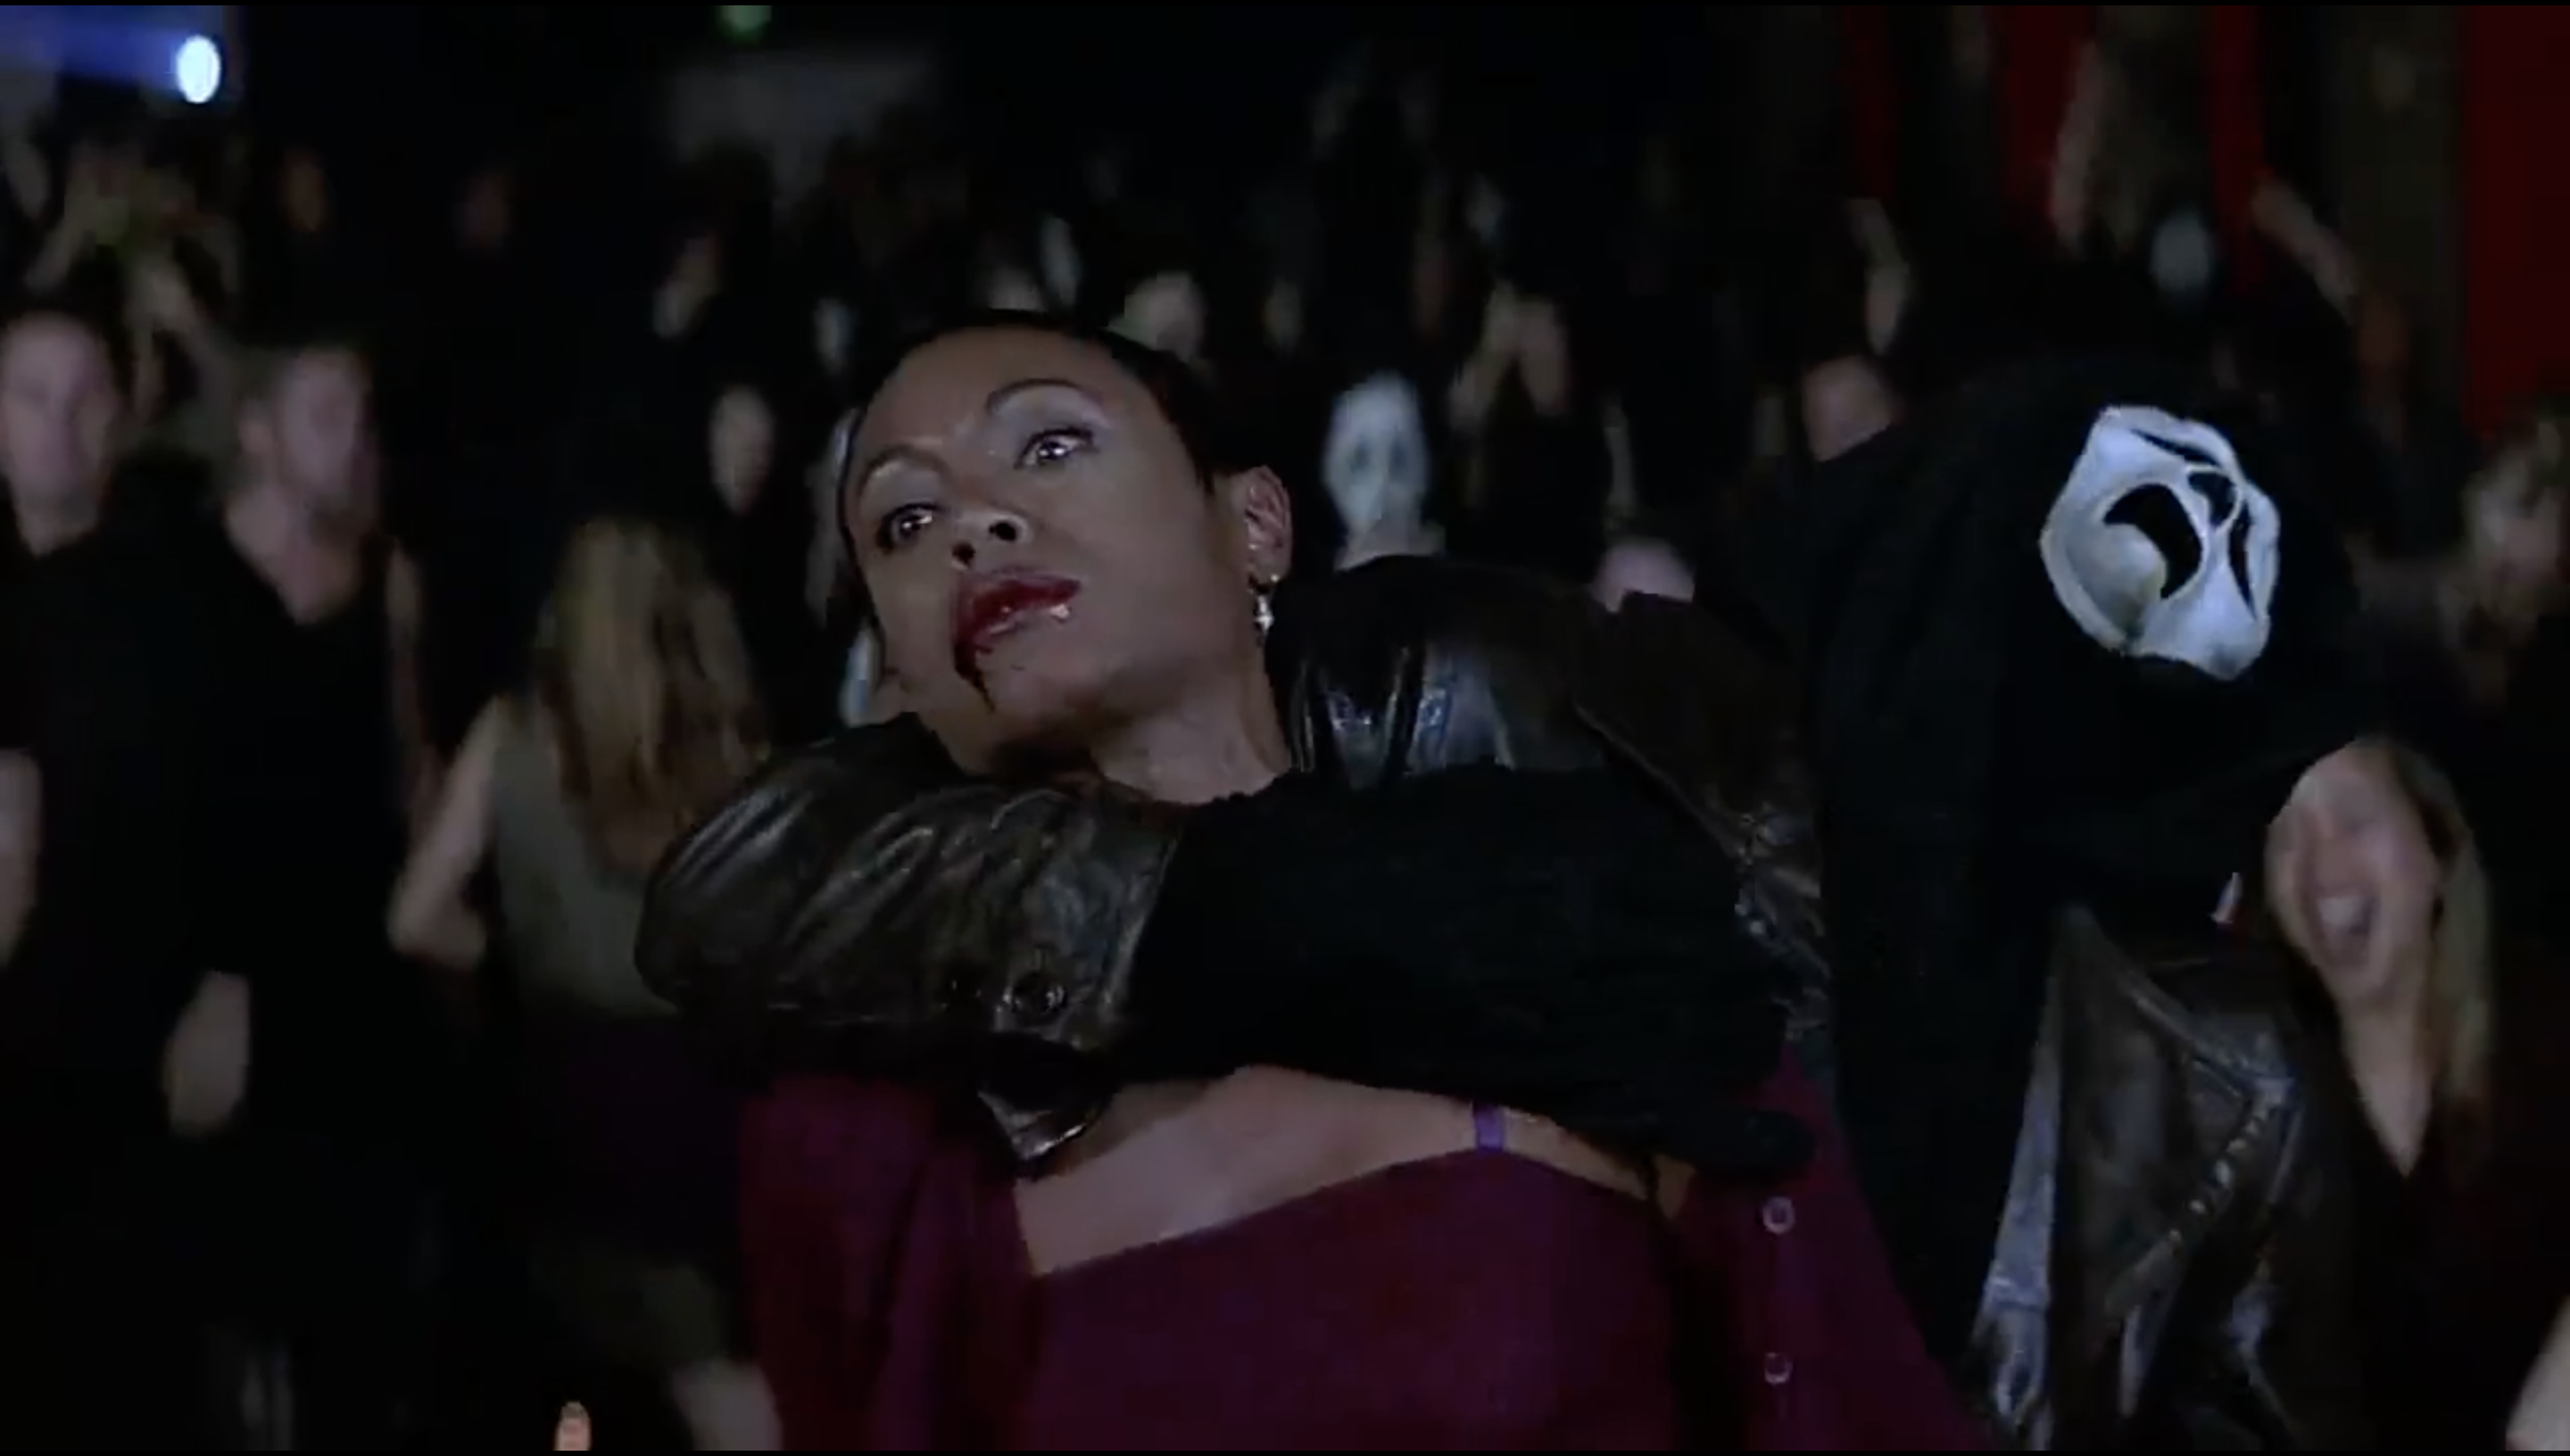 Jada Pinkett Smith gets stabbed by Ghostface in a movie theater